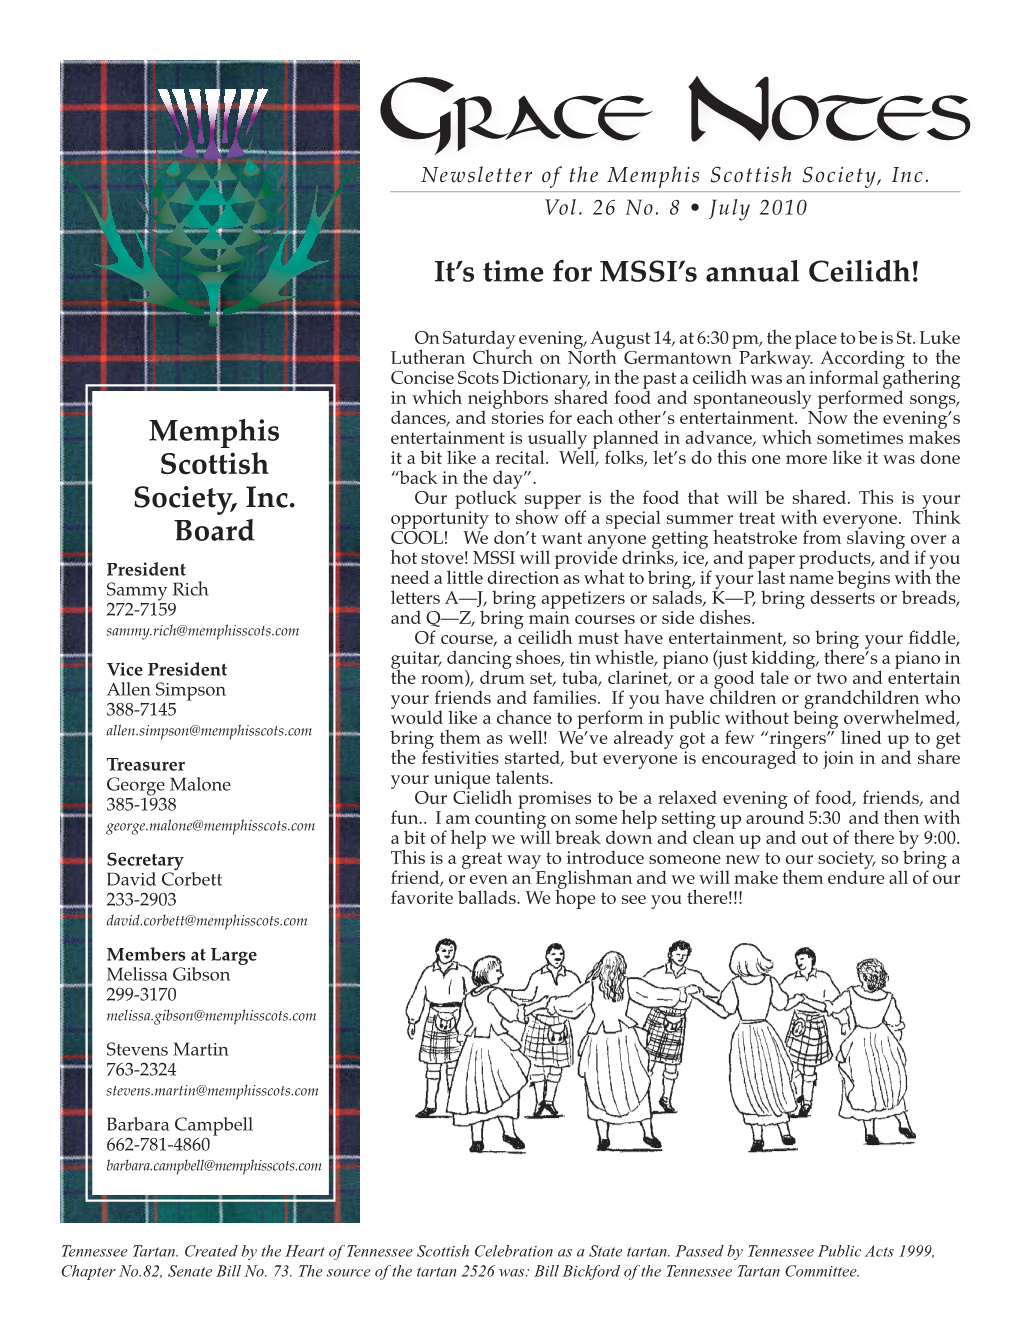 Grace Notes Is the Official Publication of the Mem- Phis Scottish Society, Inc